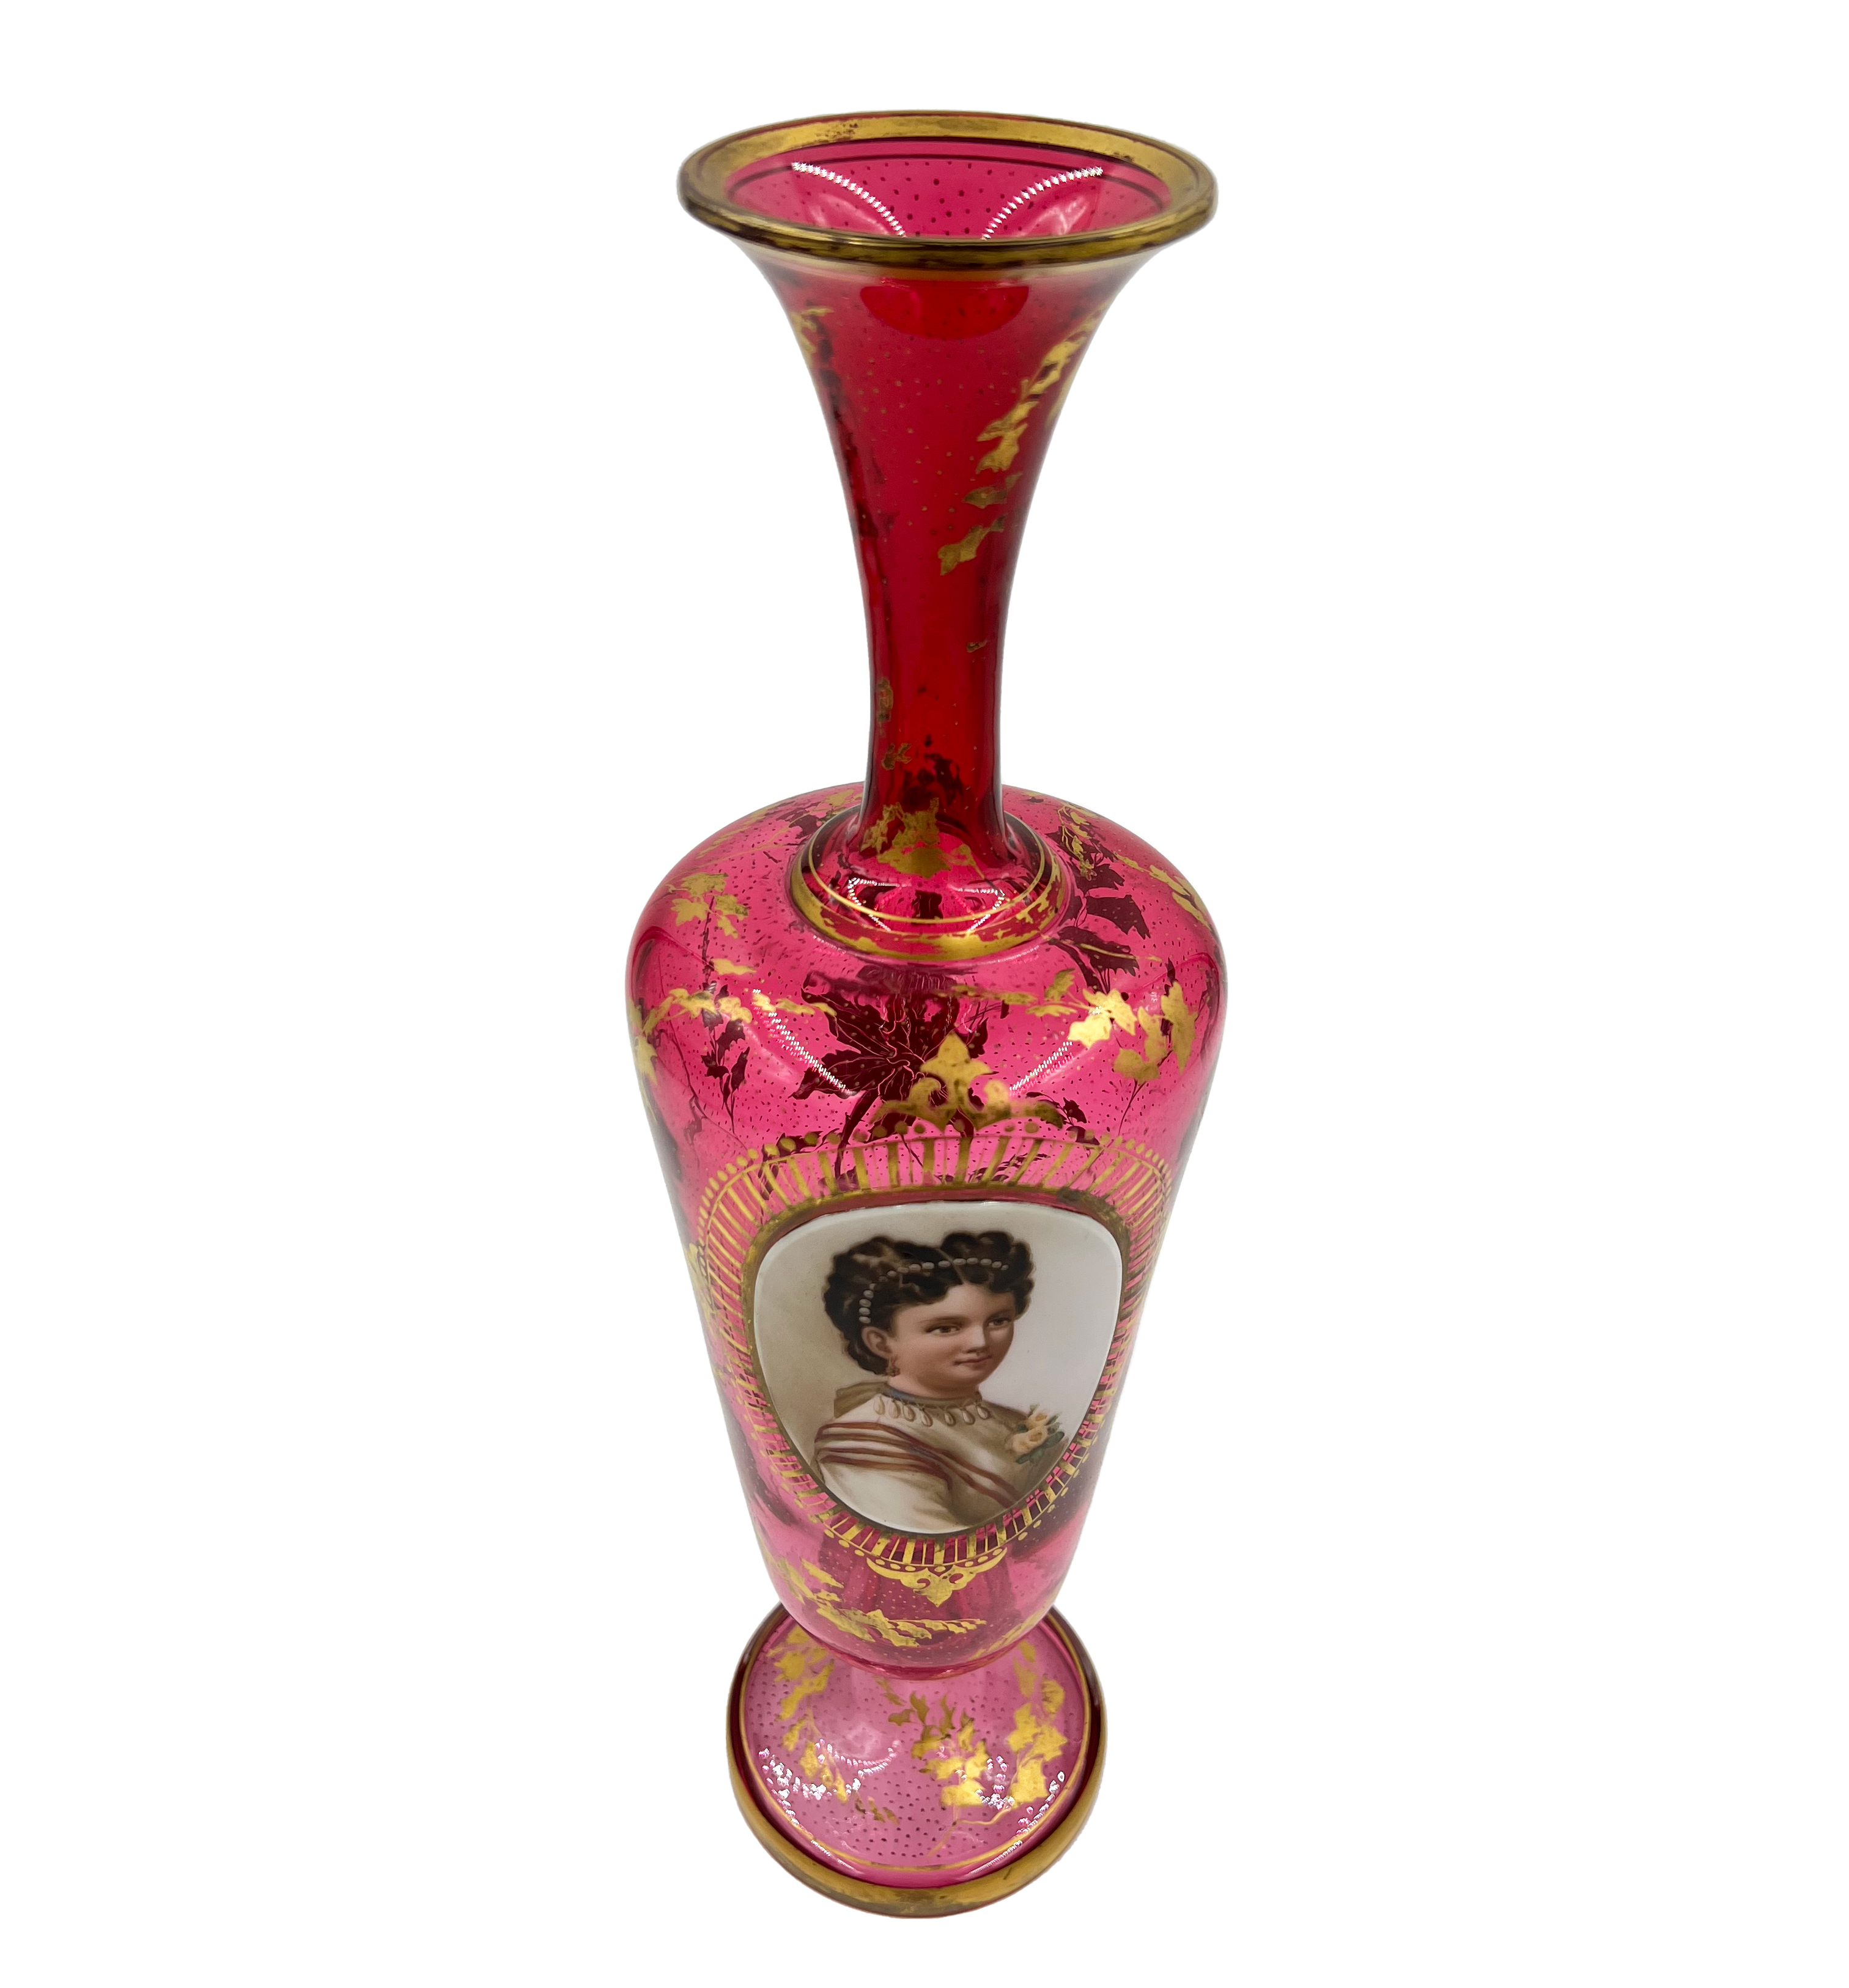 LARGE 19TH CENTURY BOHEMIAN GLASS VASE WITH GOLD GILDING AND HAND PAINTED PORCELAIN PLAQUE - Image 3 of 3